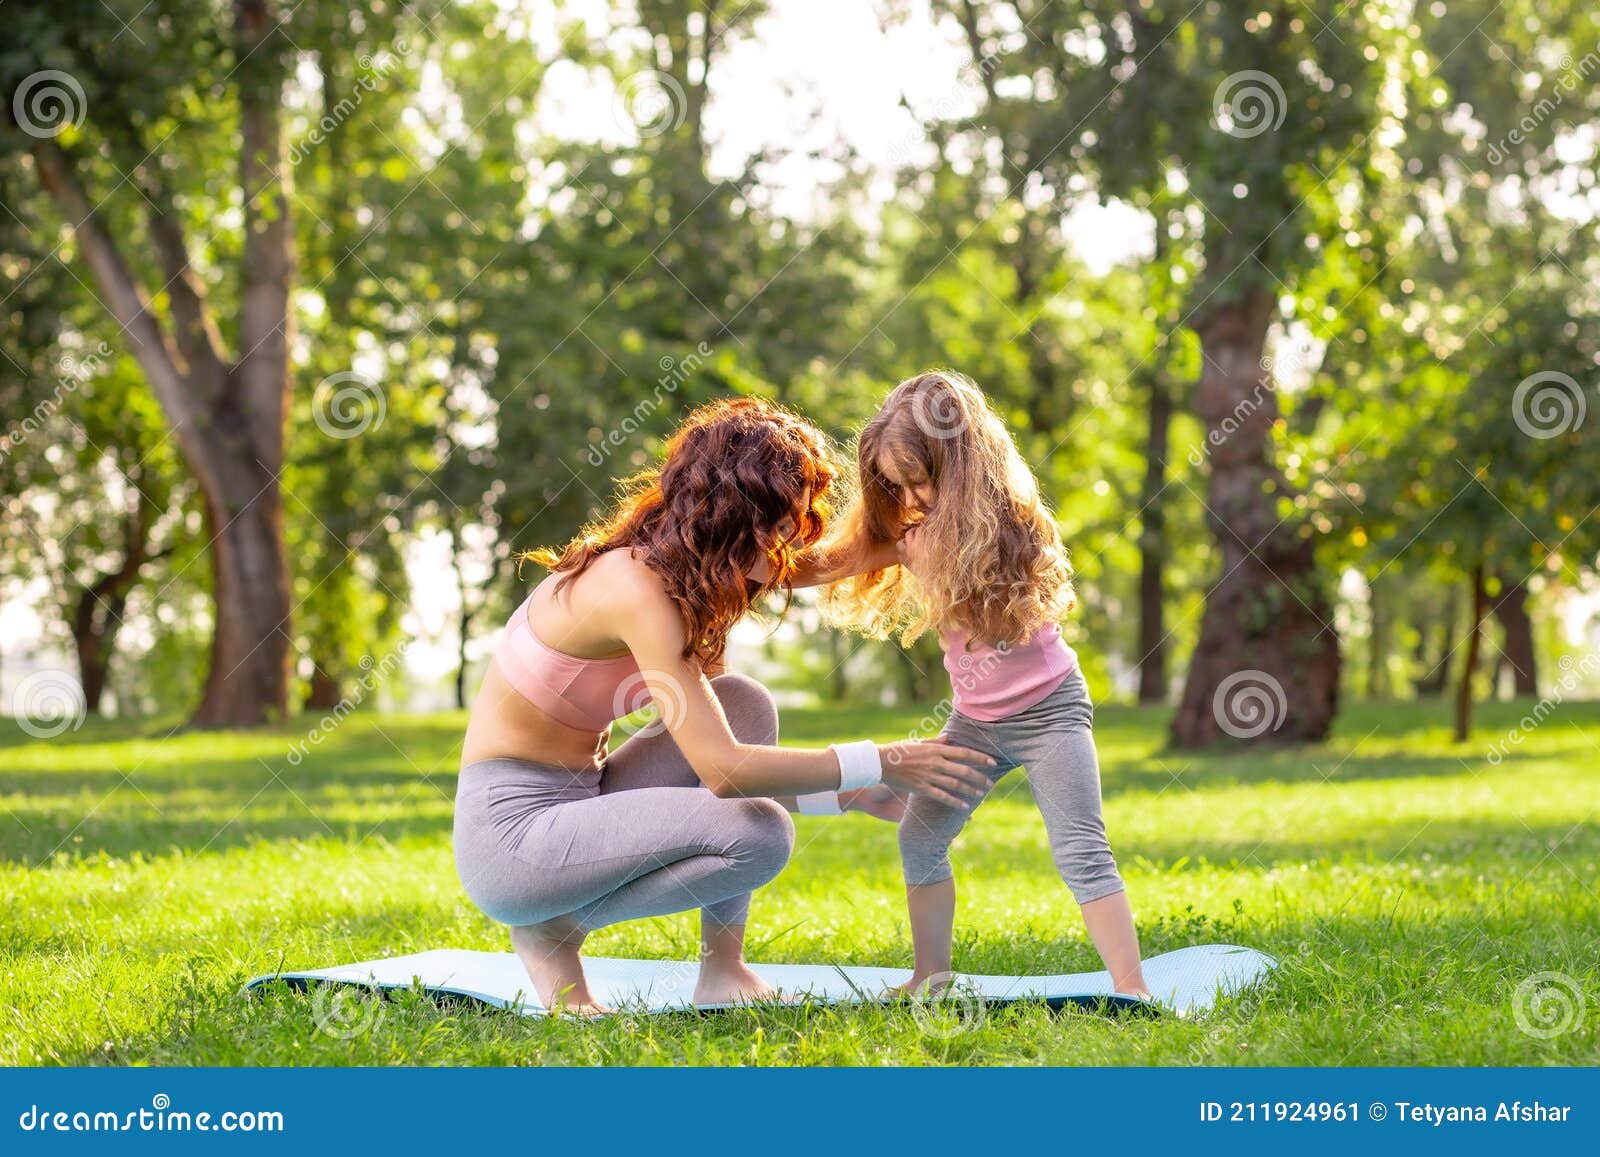 Mother Teaching Her Small Daughter Yoga In The Park At Daytime Stock Image Image Of Adult